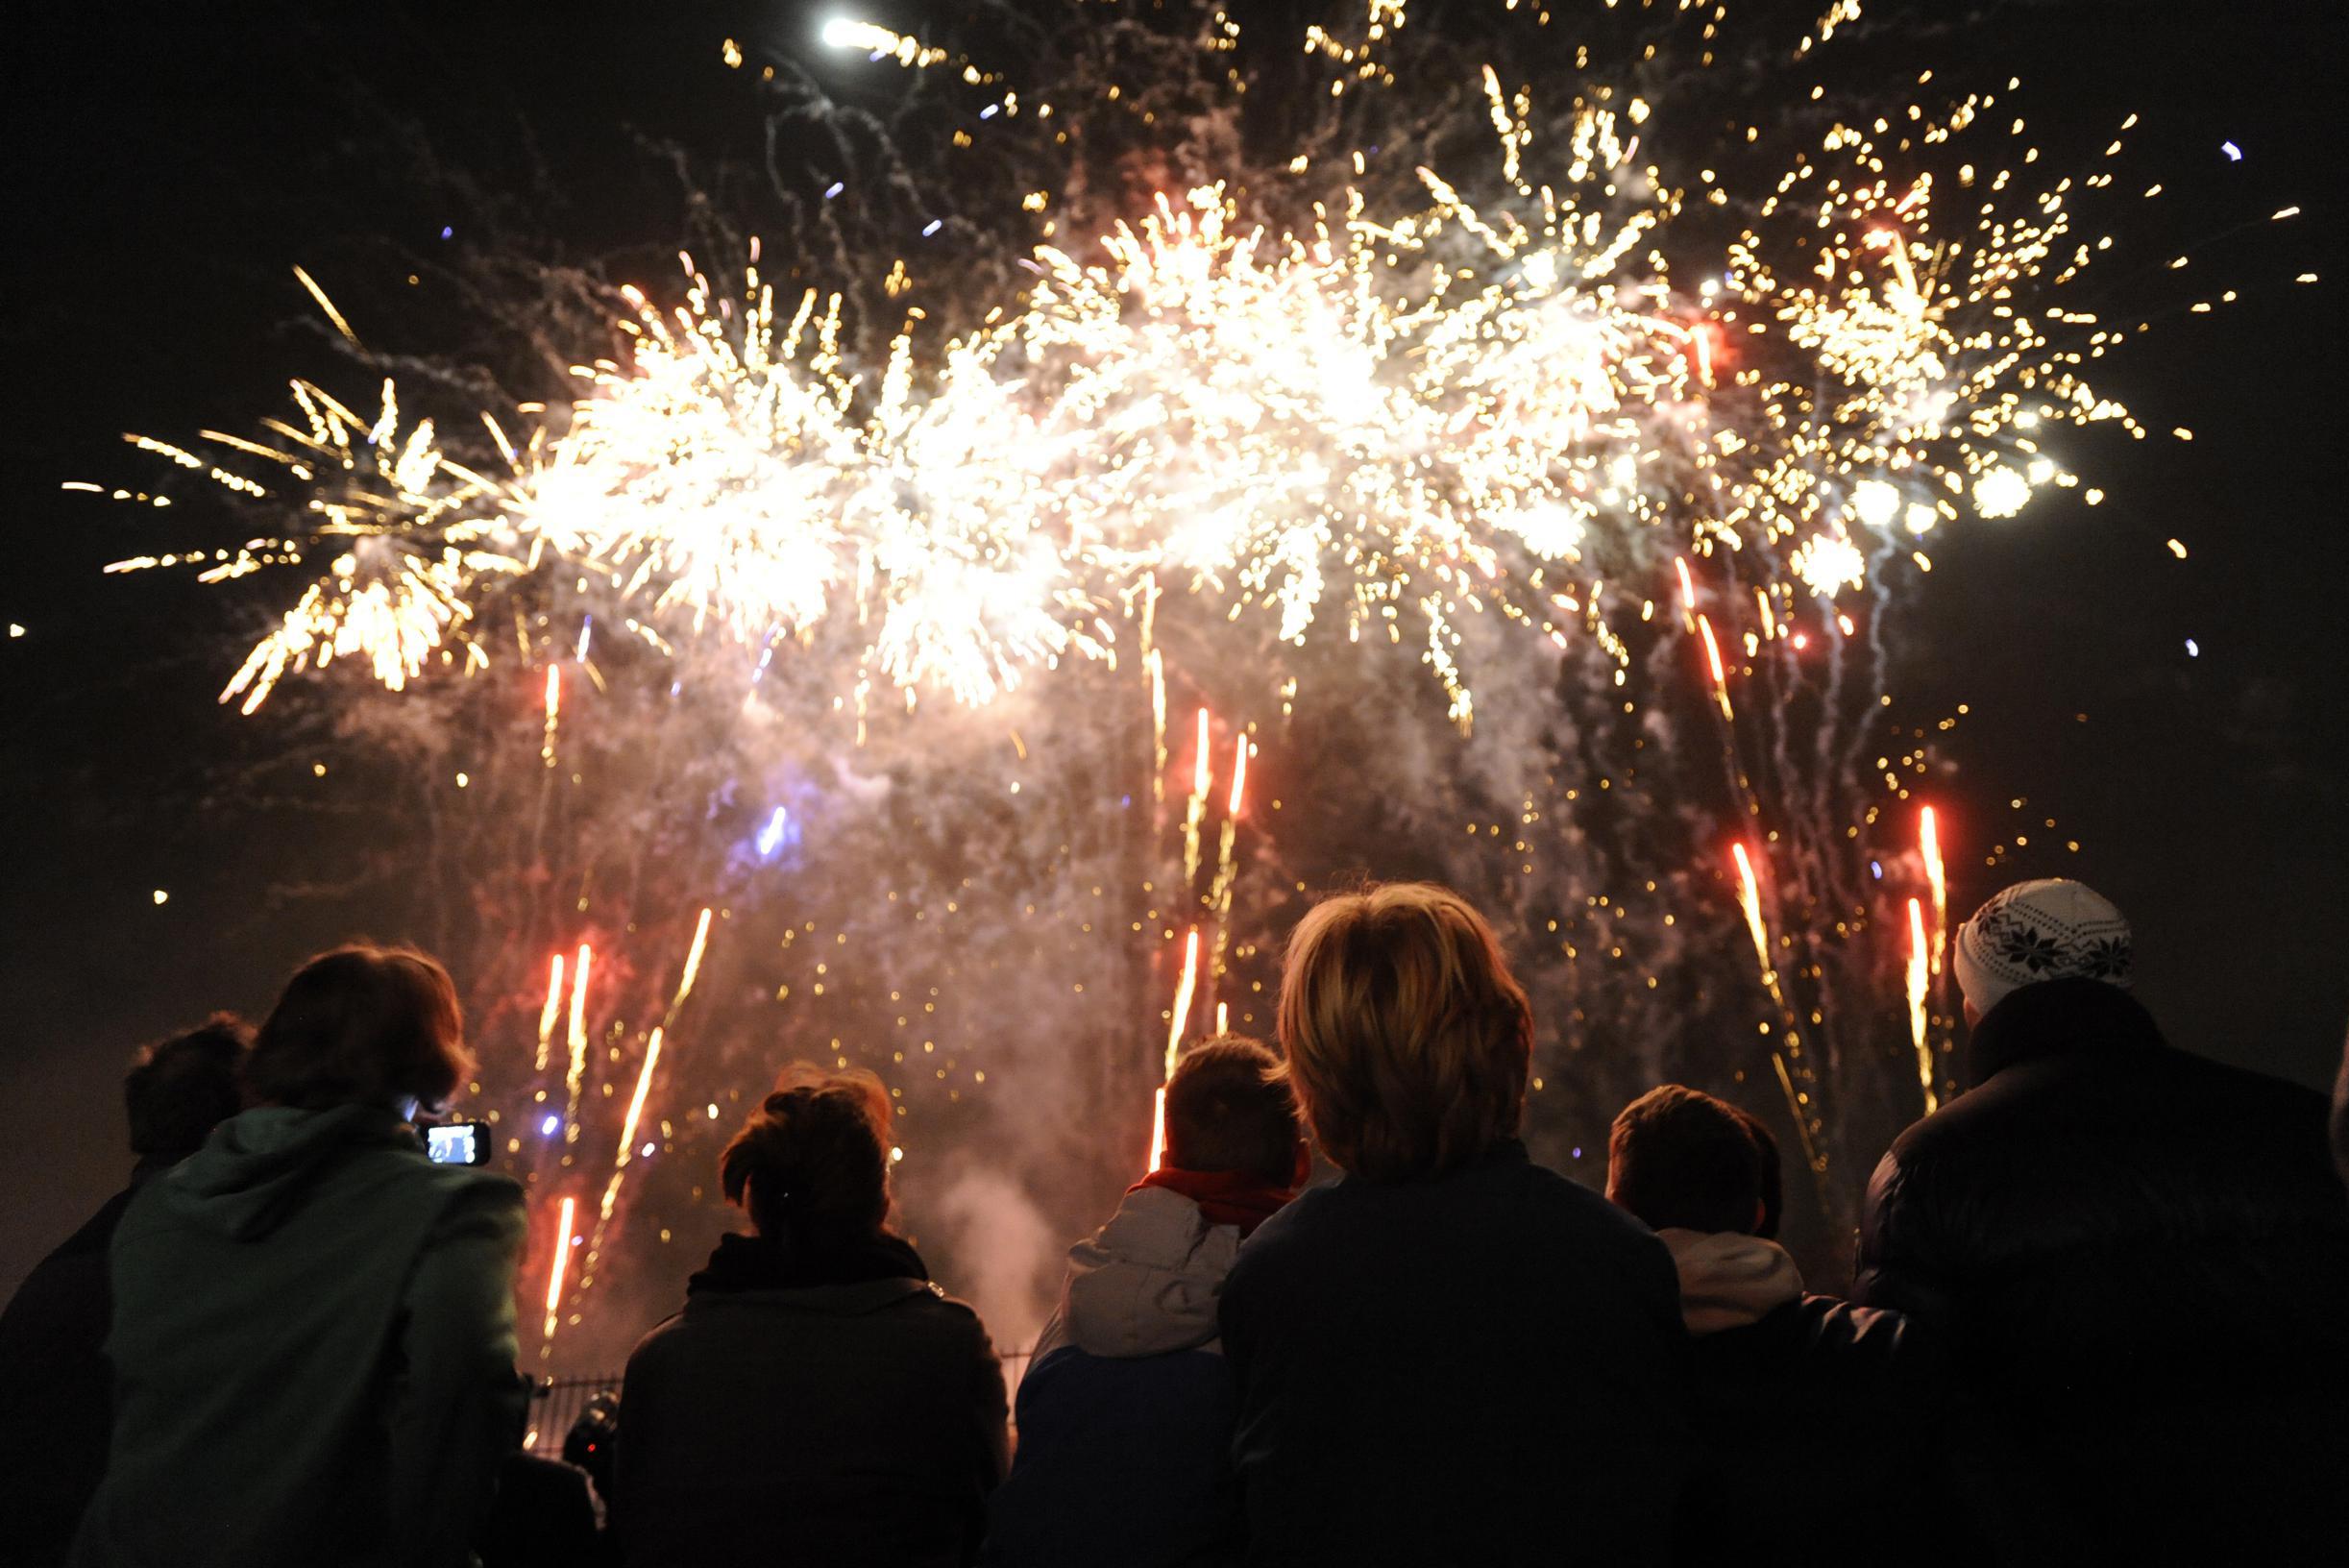 Record: 110 million euros worth of fireworks sold in the Netherlands